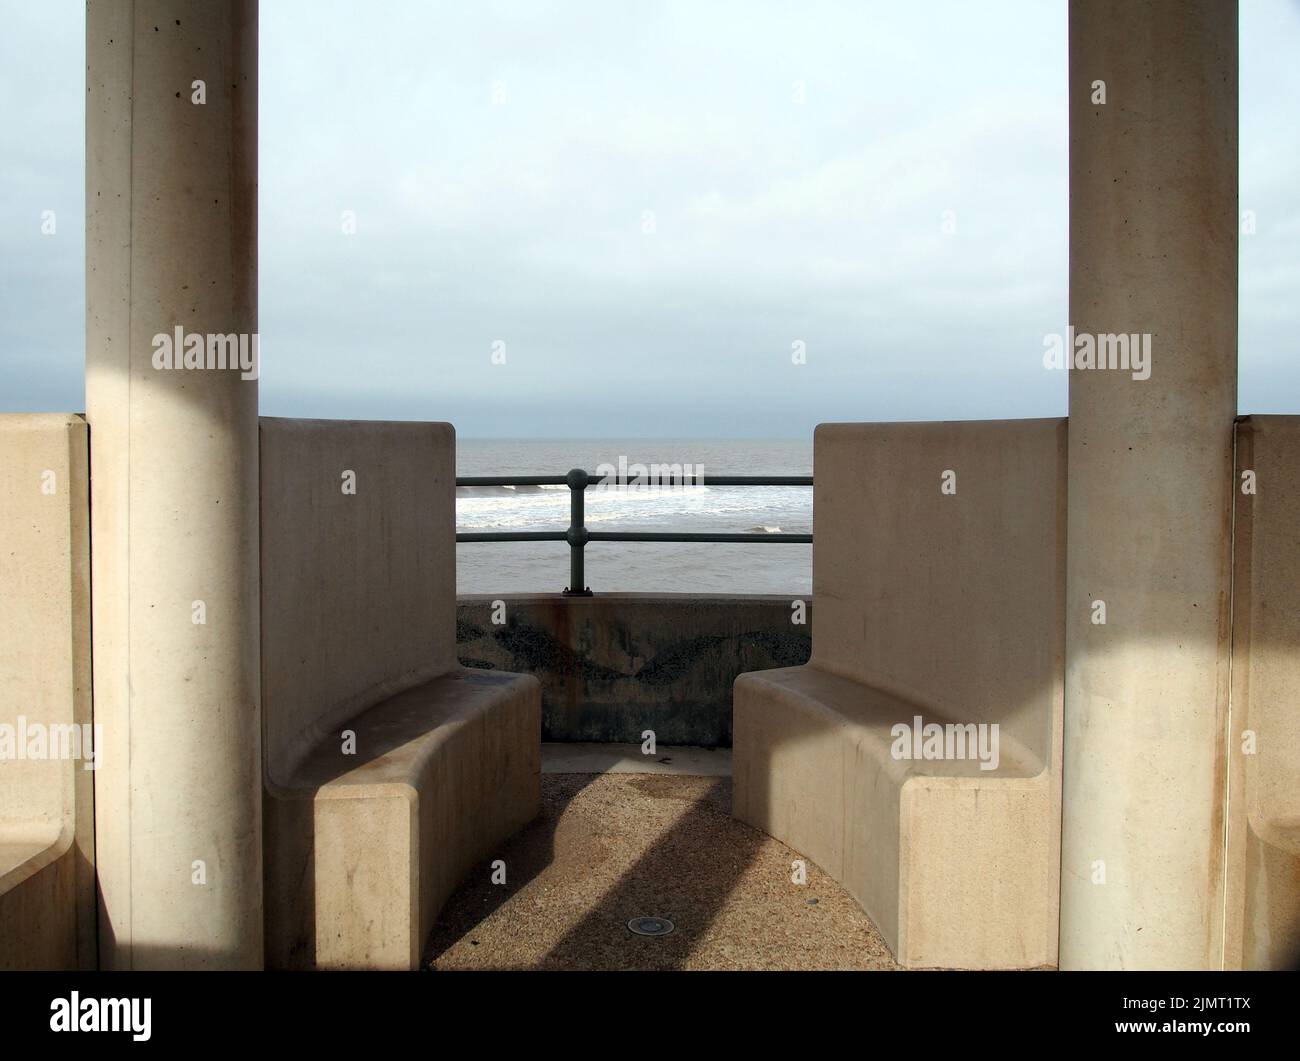 Concrete seats in a seafront shelter in cleveleys in merseyside Stock Photo